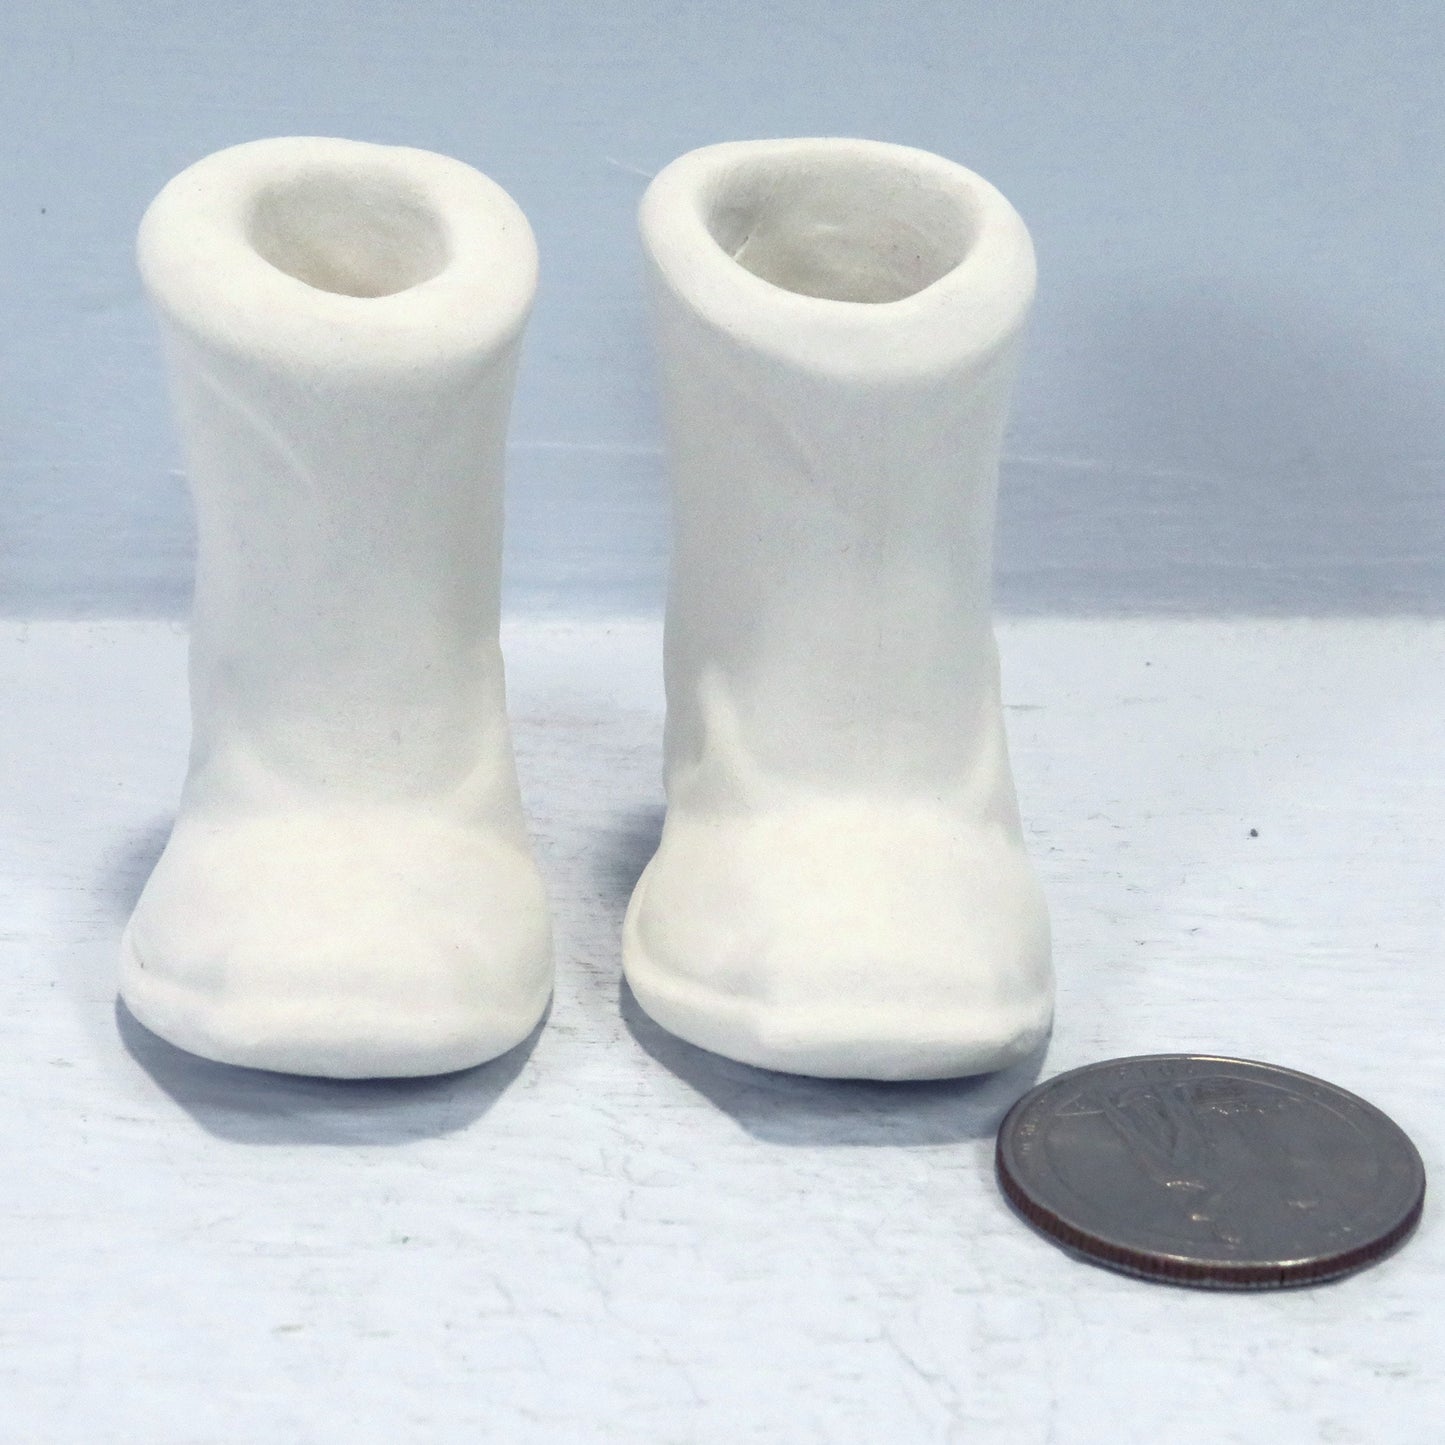 Handmade Unpainted Ceramic Boots / Ready to Paint Ceramic Cowboy Boot Figurines / Ceramics to Paint / Cowboy Lover Gift / Boot Lover / Cowboy Decor